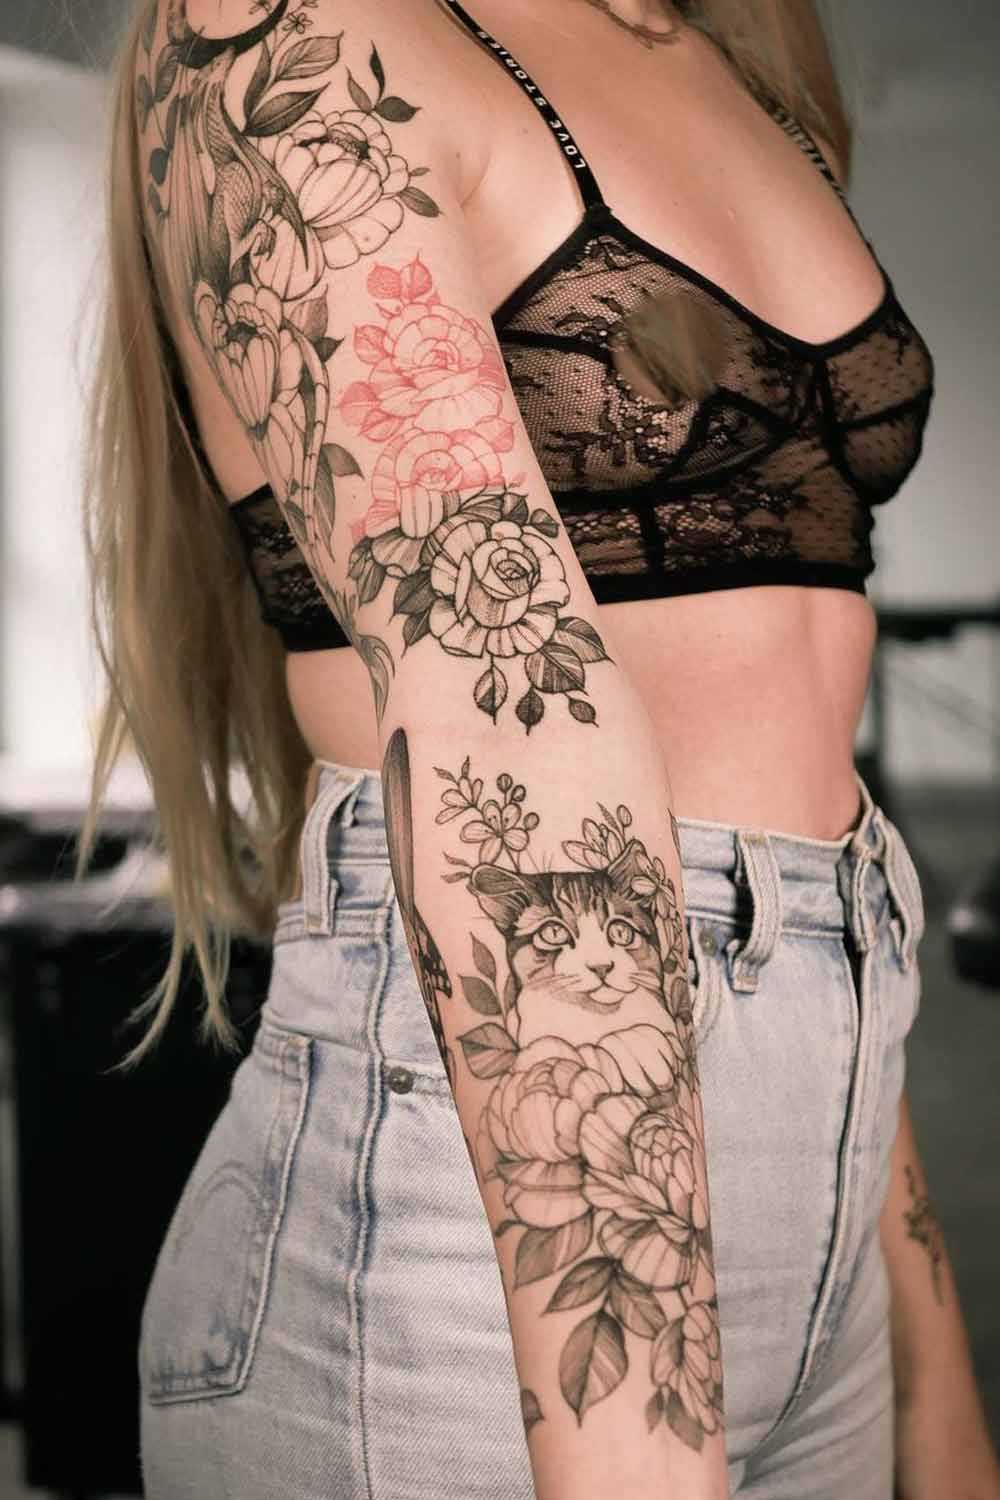 Floral Tattoo Sleeve with a Cat Design